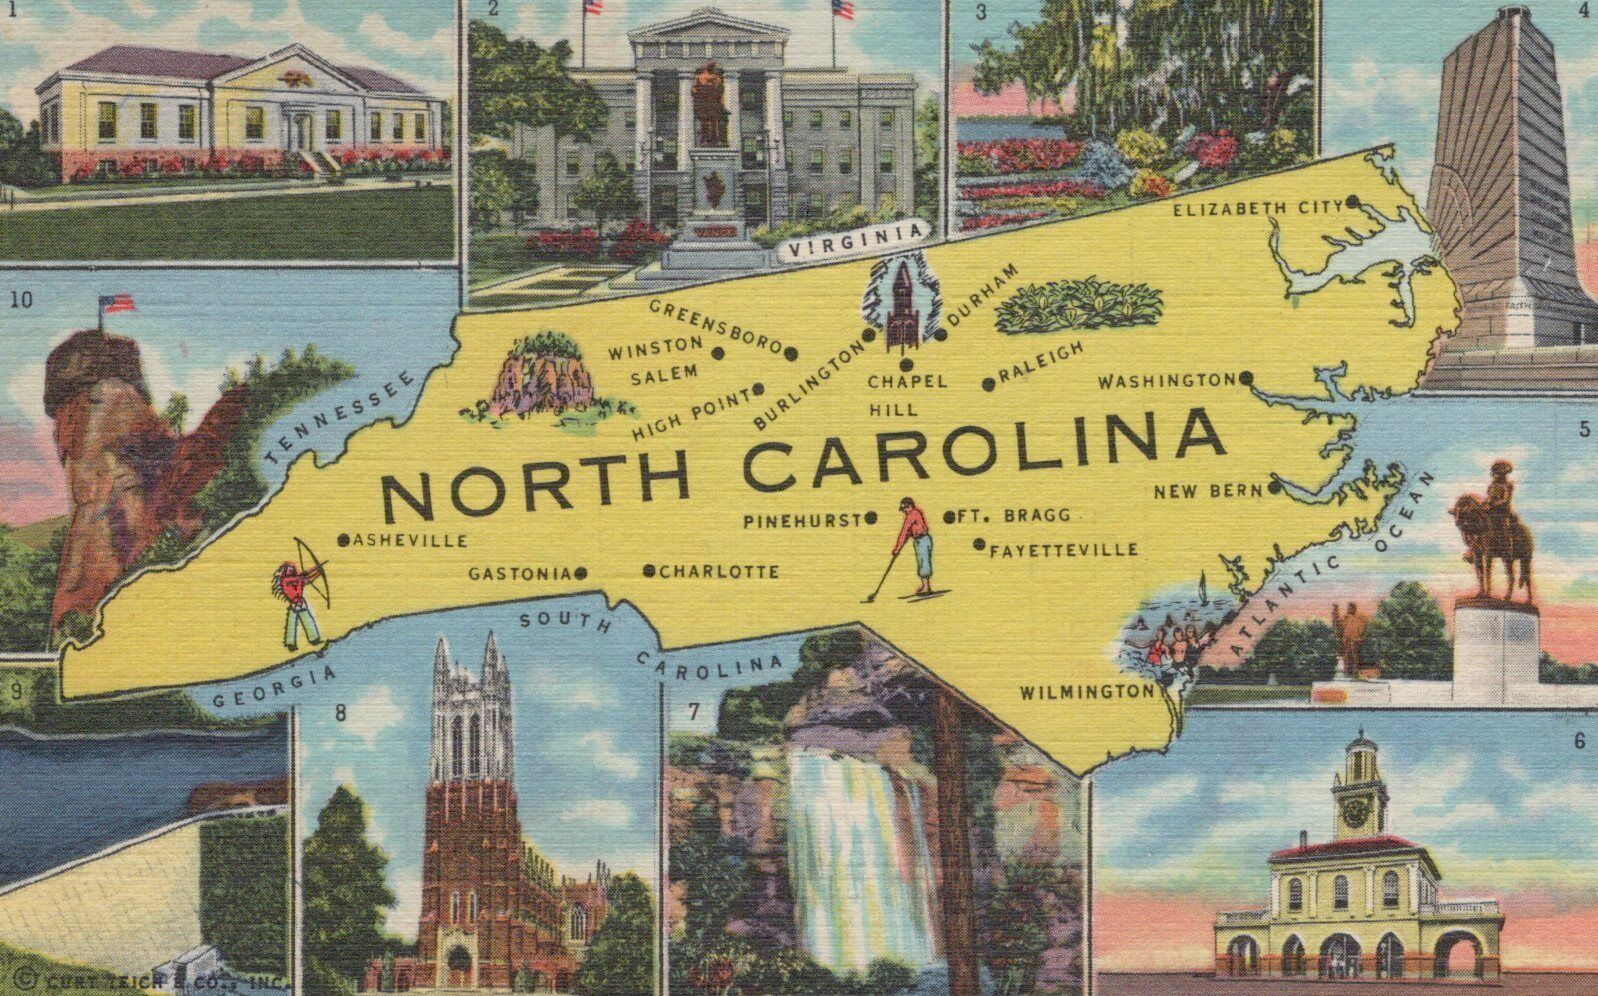 Greetings From North Carolina Charlotte Vintage Linen Post Card